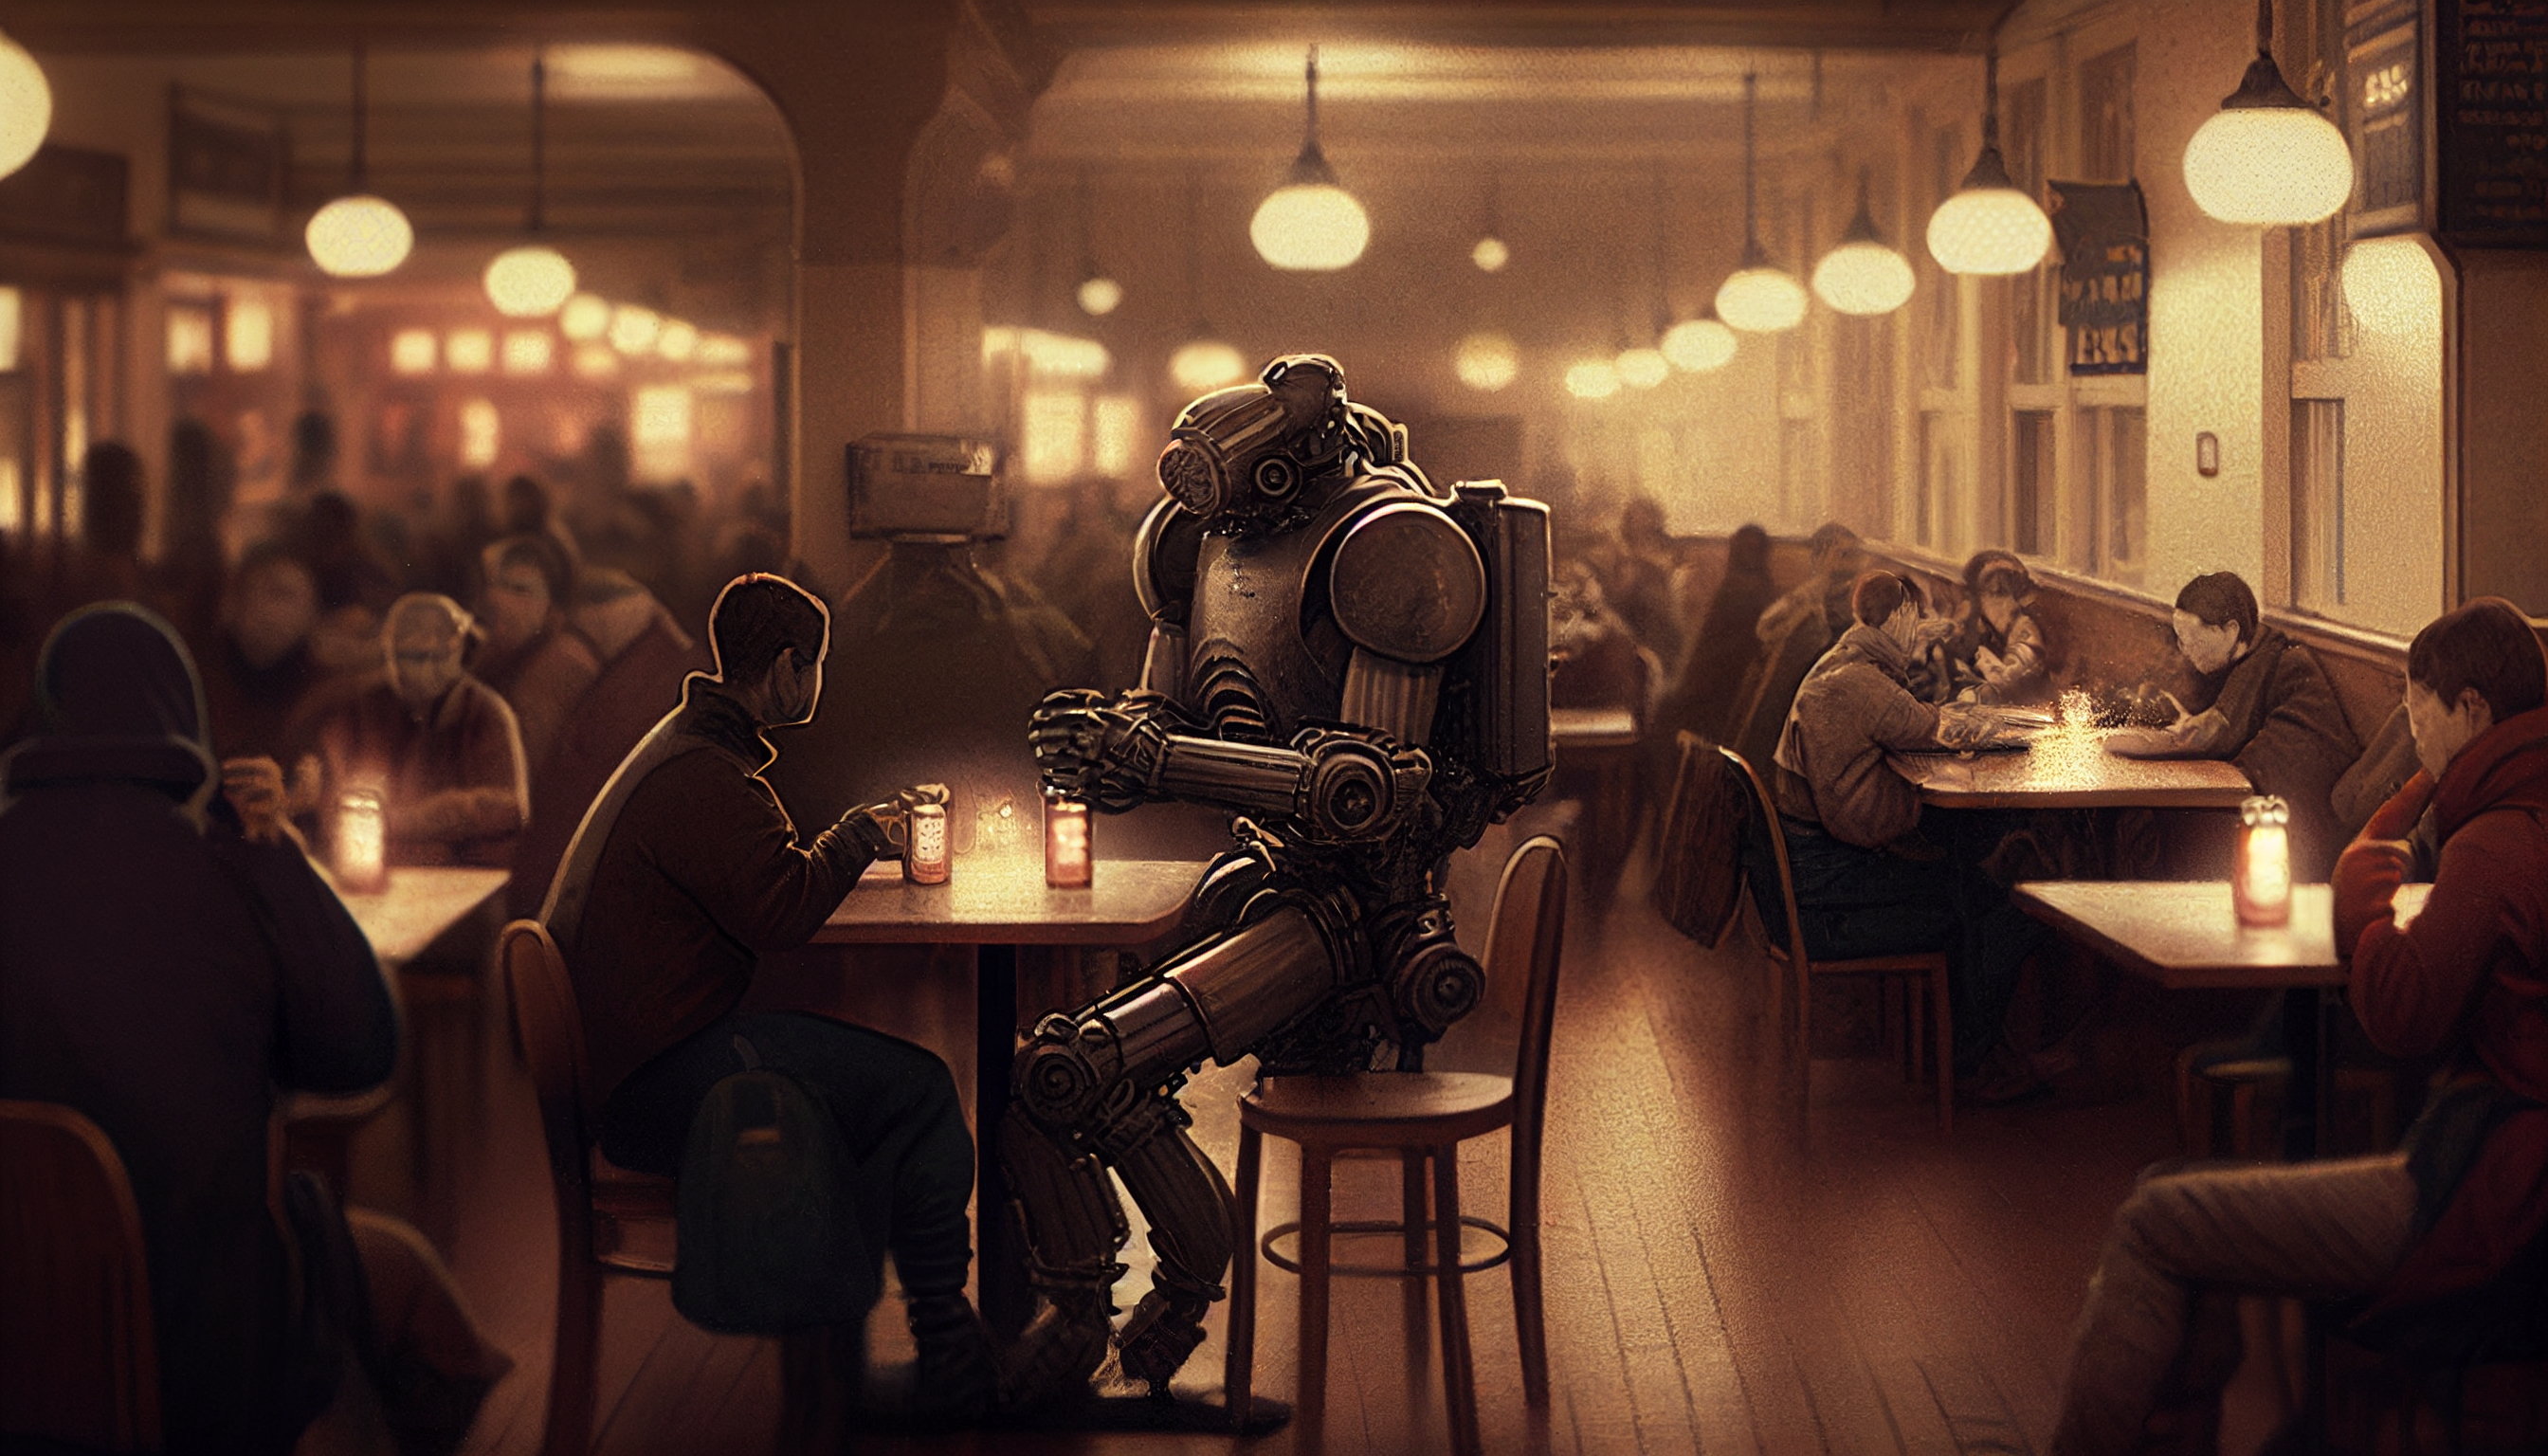 Image of robots and humans coexisting peacefully